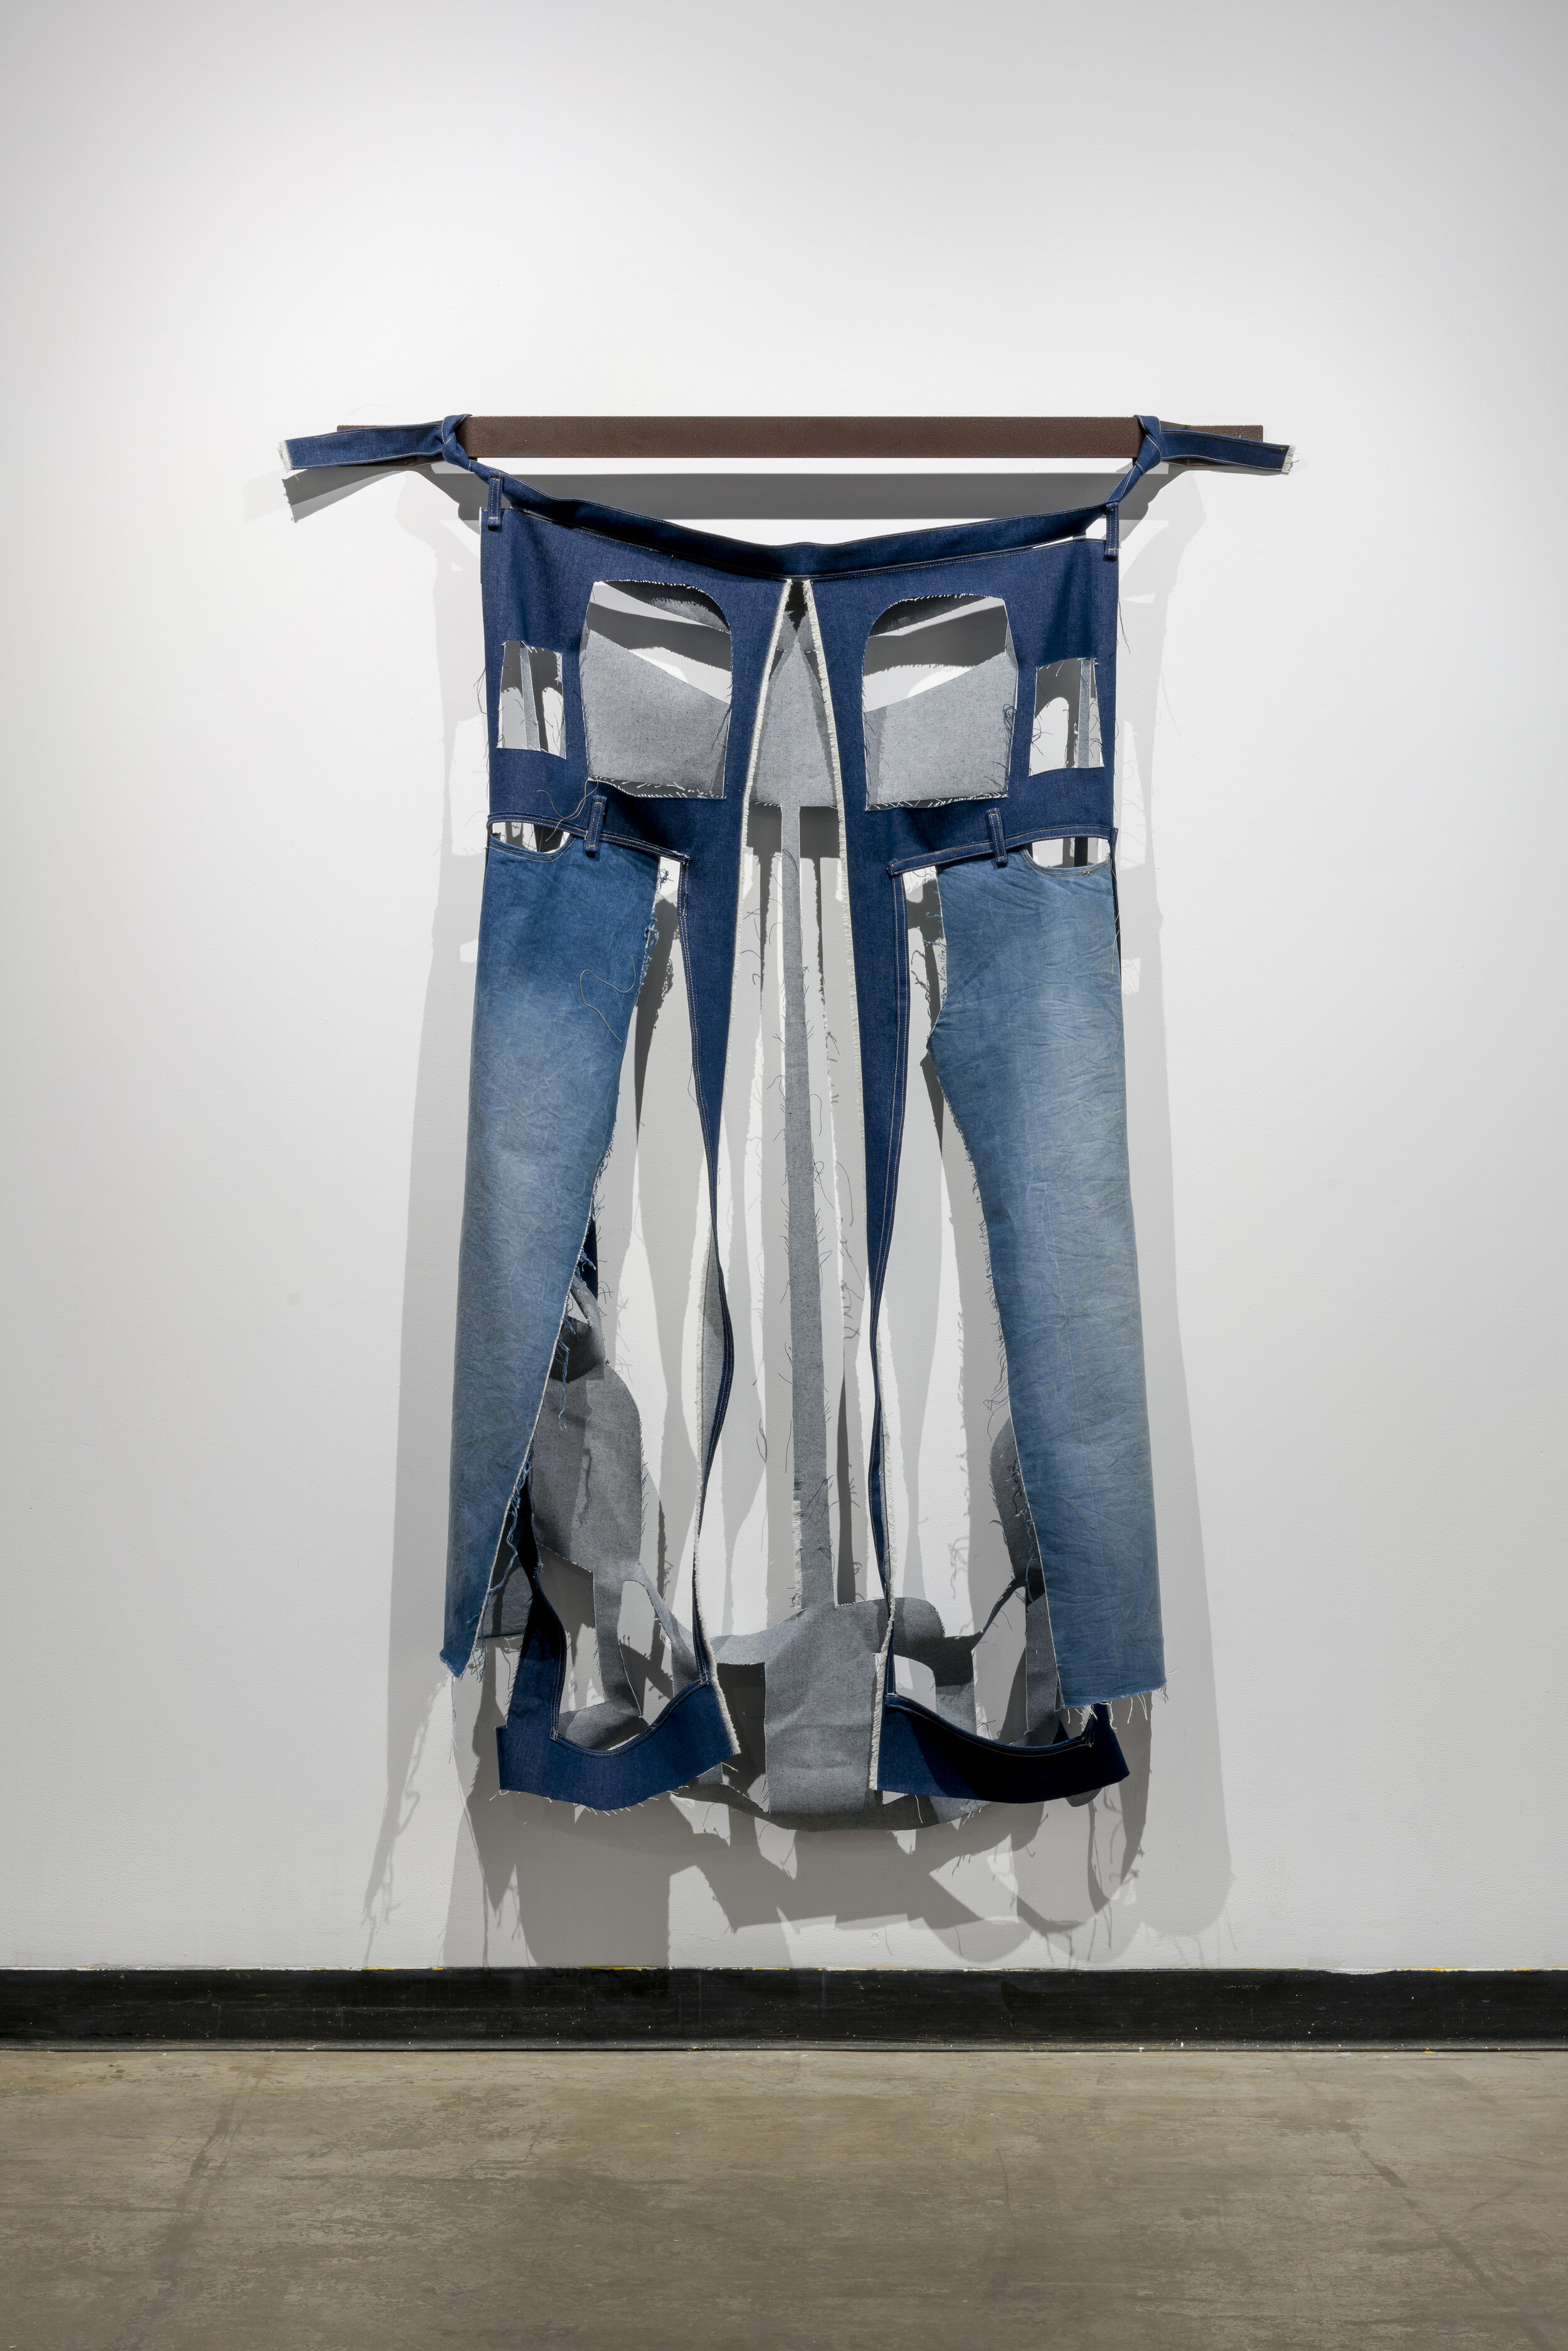  This is a hanging piece that looks to be made of a pair of blue jeans that have been deconstructed. This piece resembles a pair of jeans in shape, but notably squares have been cut out in the area where the pockets would be. The pants also look to h